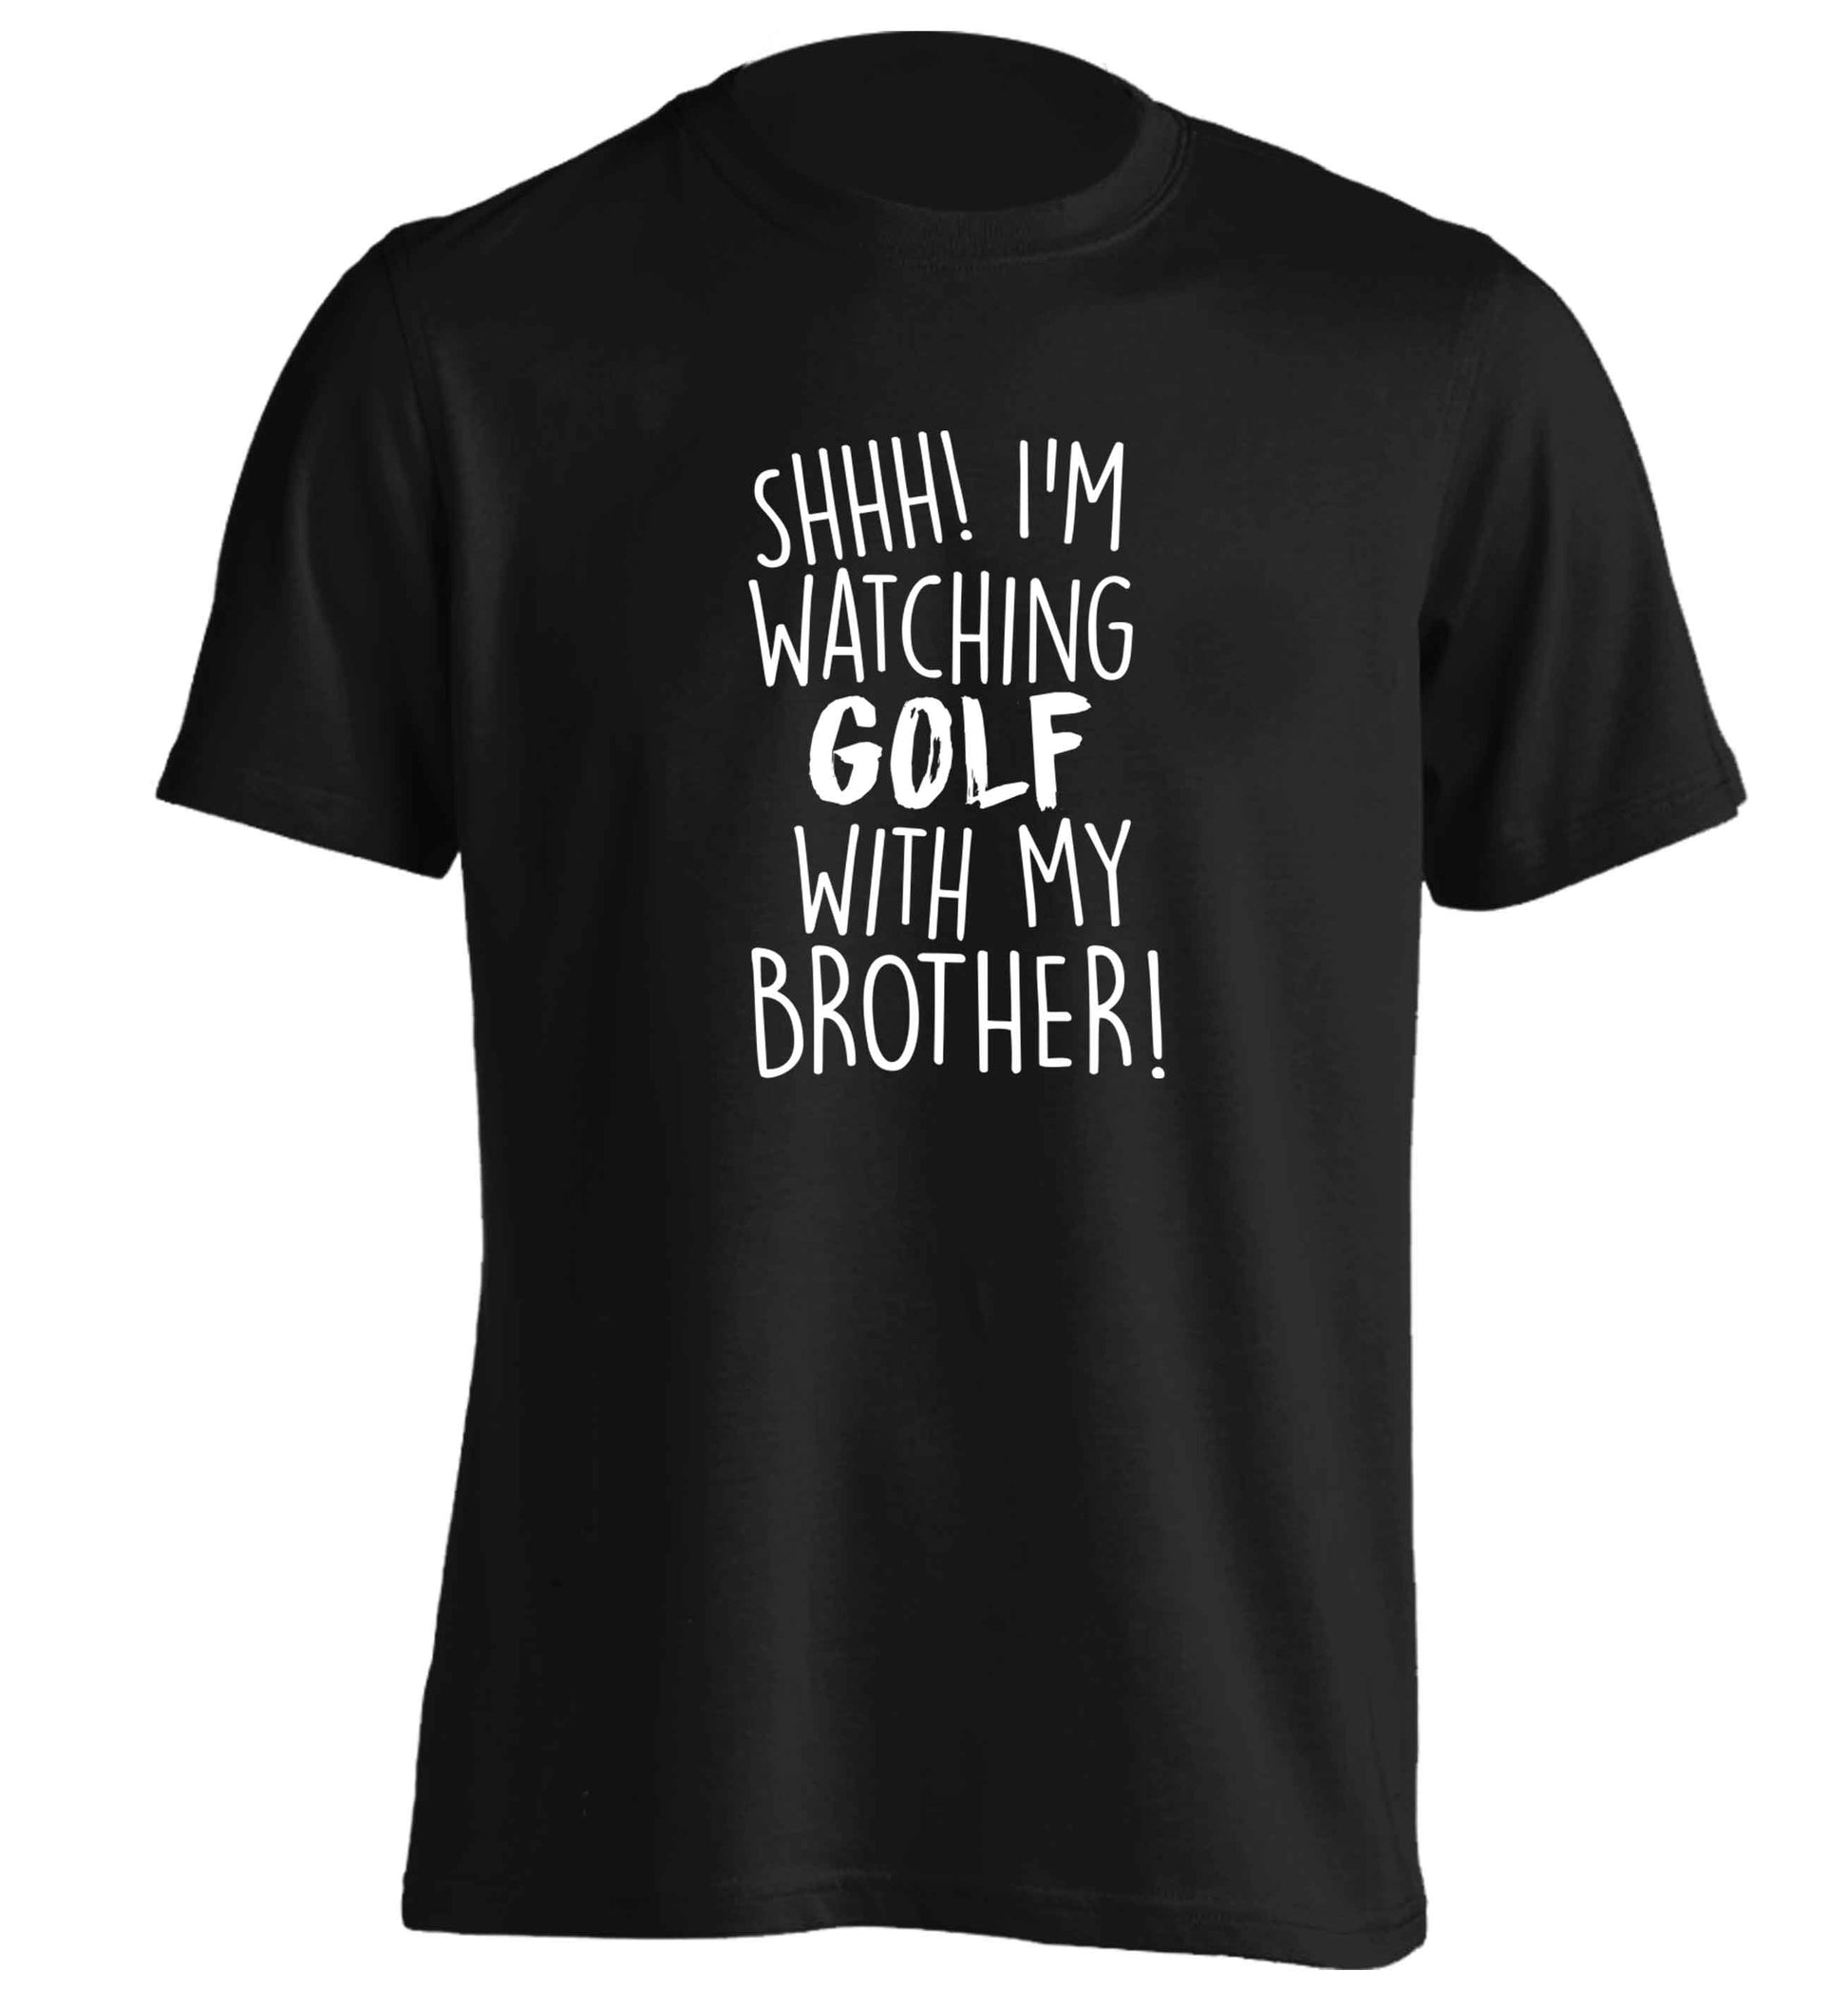 Shh I'm watching golf with my brother adults unisex black Tshirt 2XL